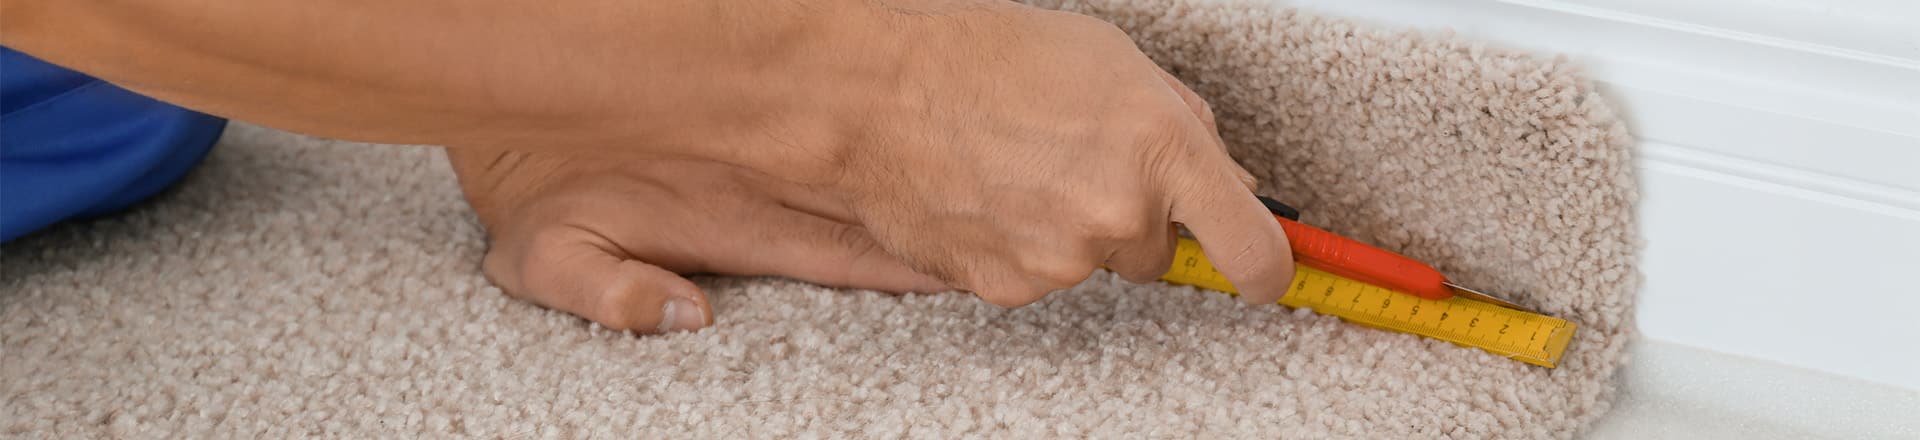 The Dangers of DIY Carpet Repairs and Why You Should Call Professionals